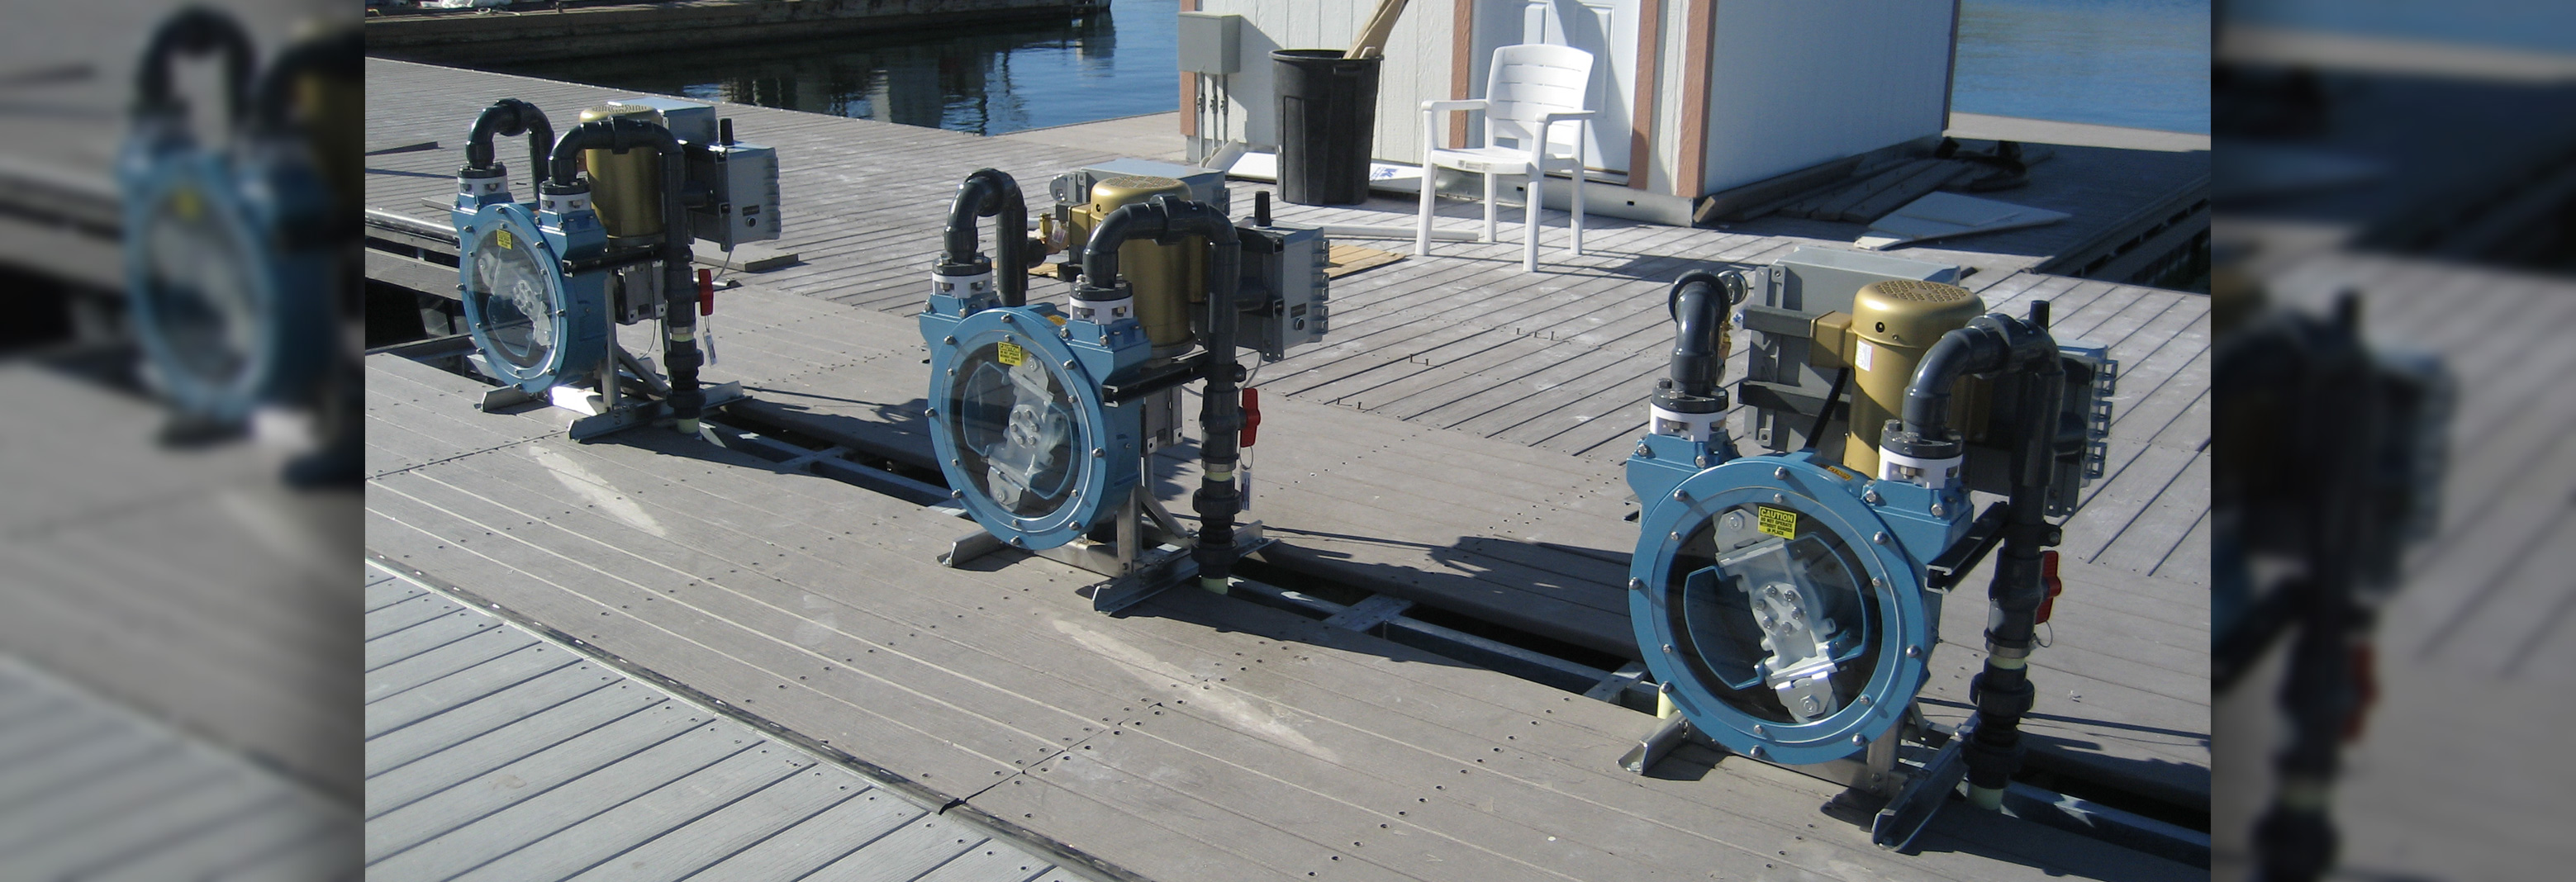 peristaltic pumps, marine waste pump out systems, marine pump out station, marine pumps, marine pump out equipment, marine pump out